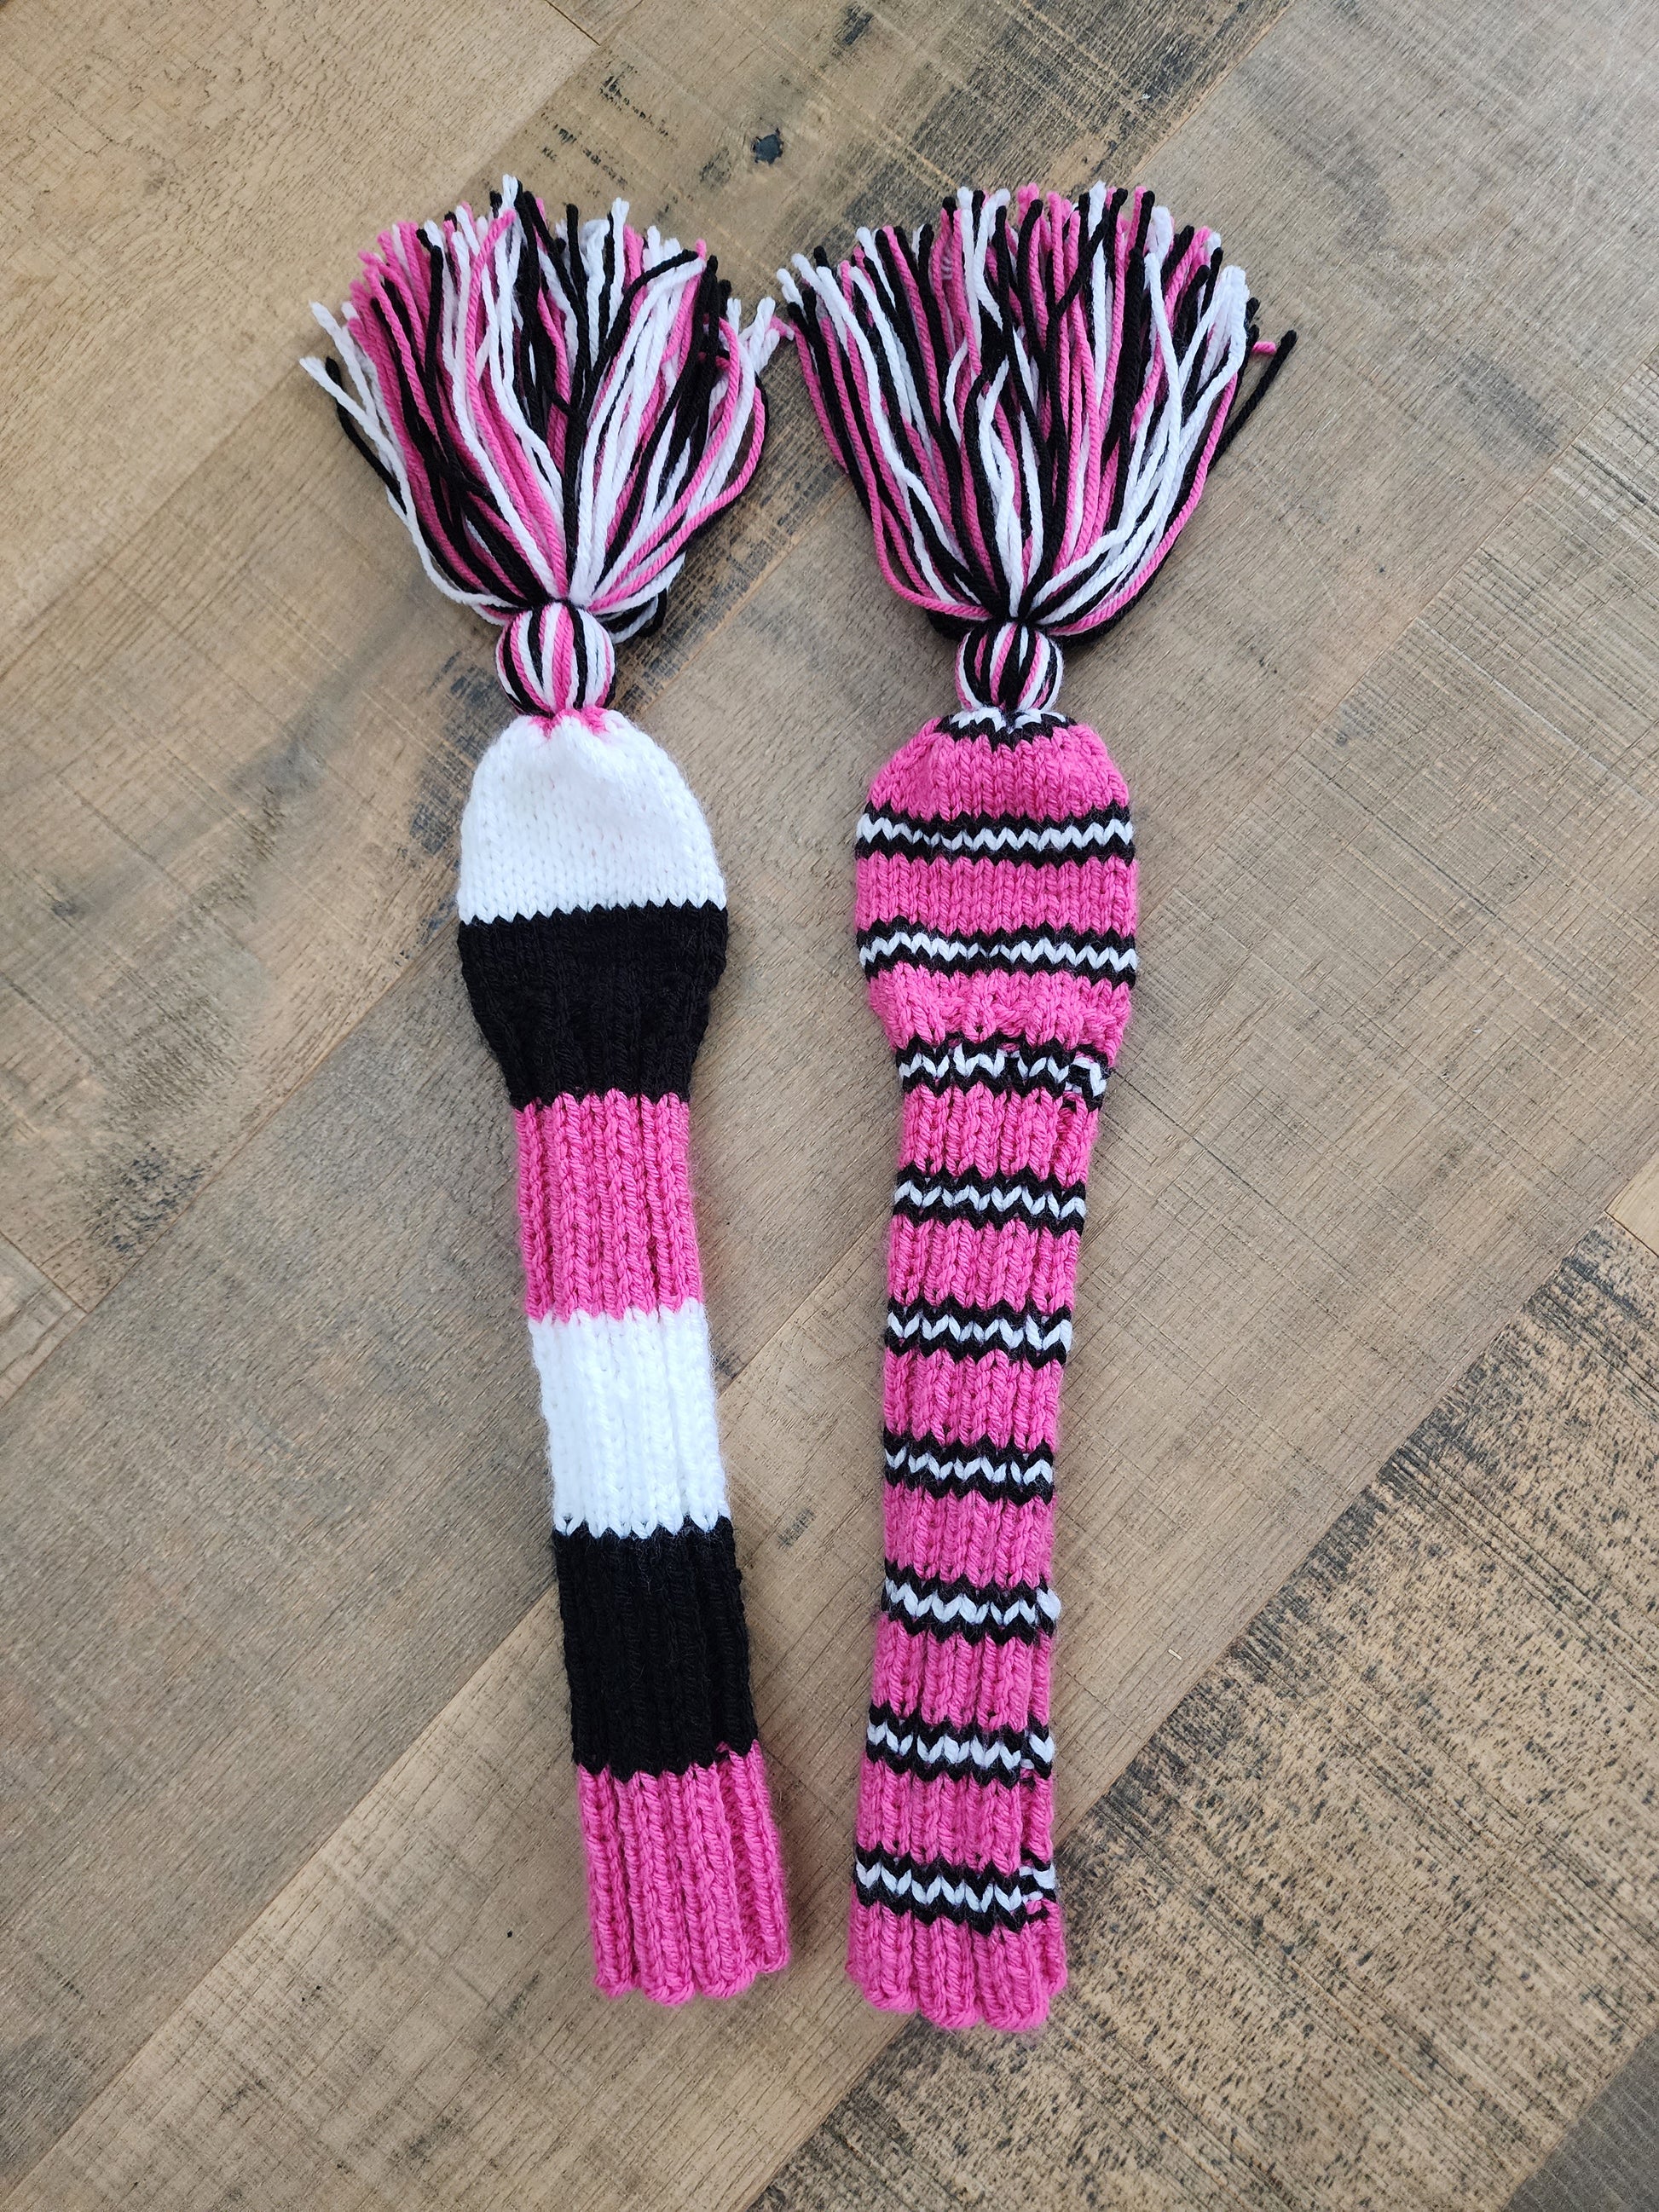 Two Hand Knit Golf Club Head Covers Retro-Vintage Black, Pink & White with Tassels for Fairway Woods - Austinknittylimits